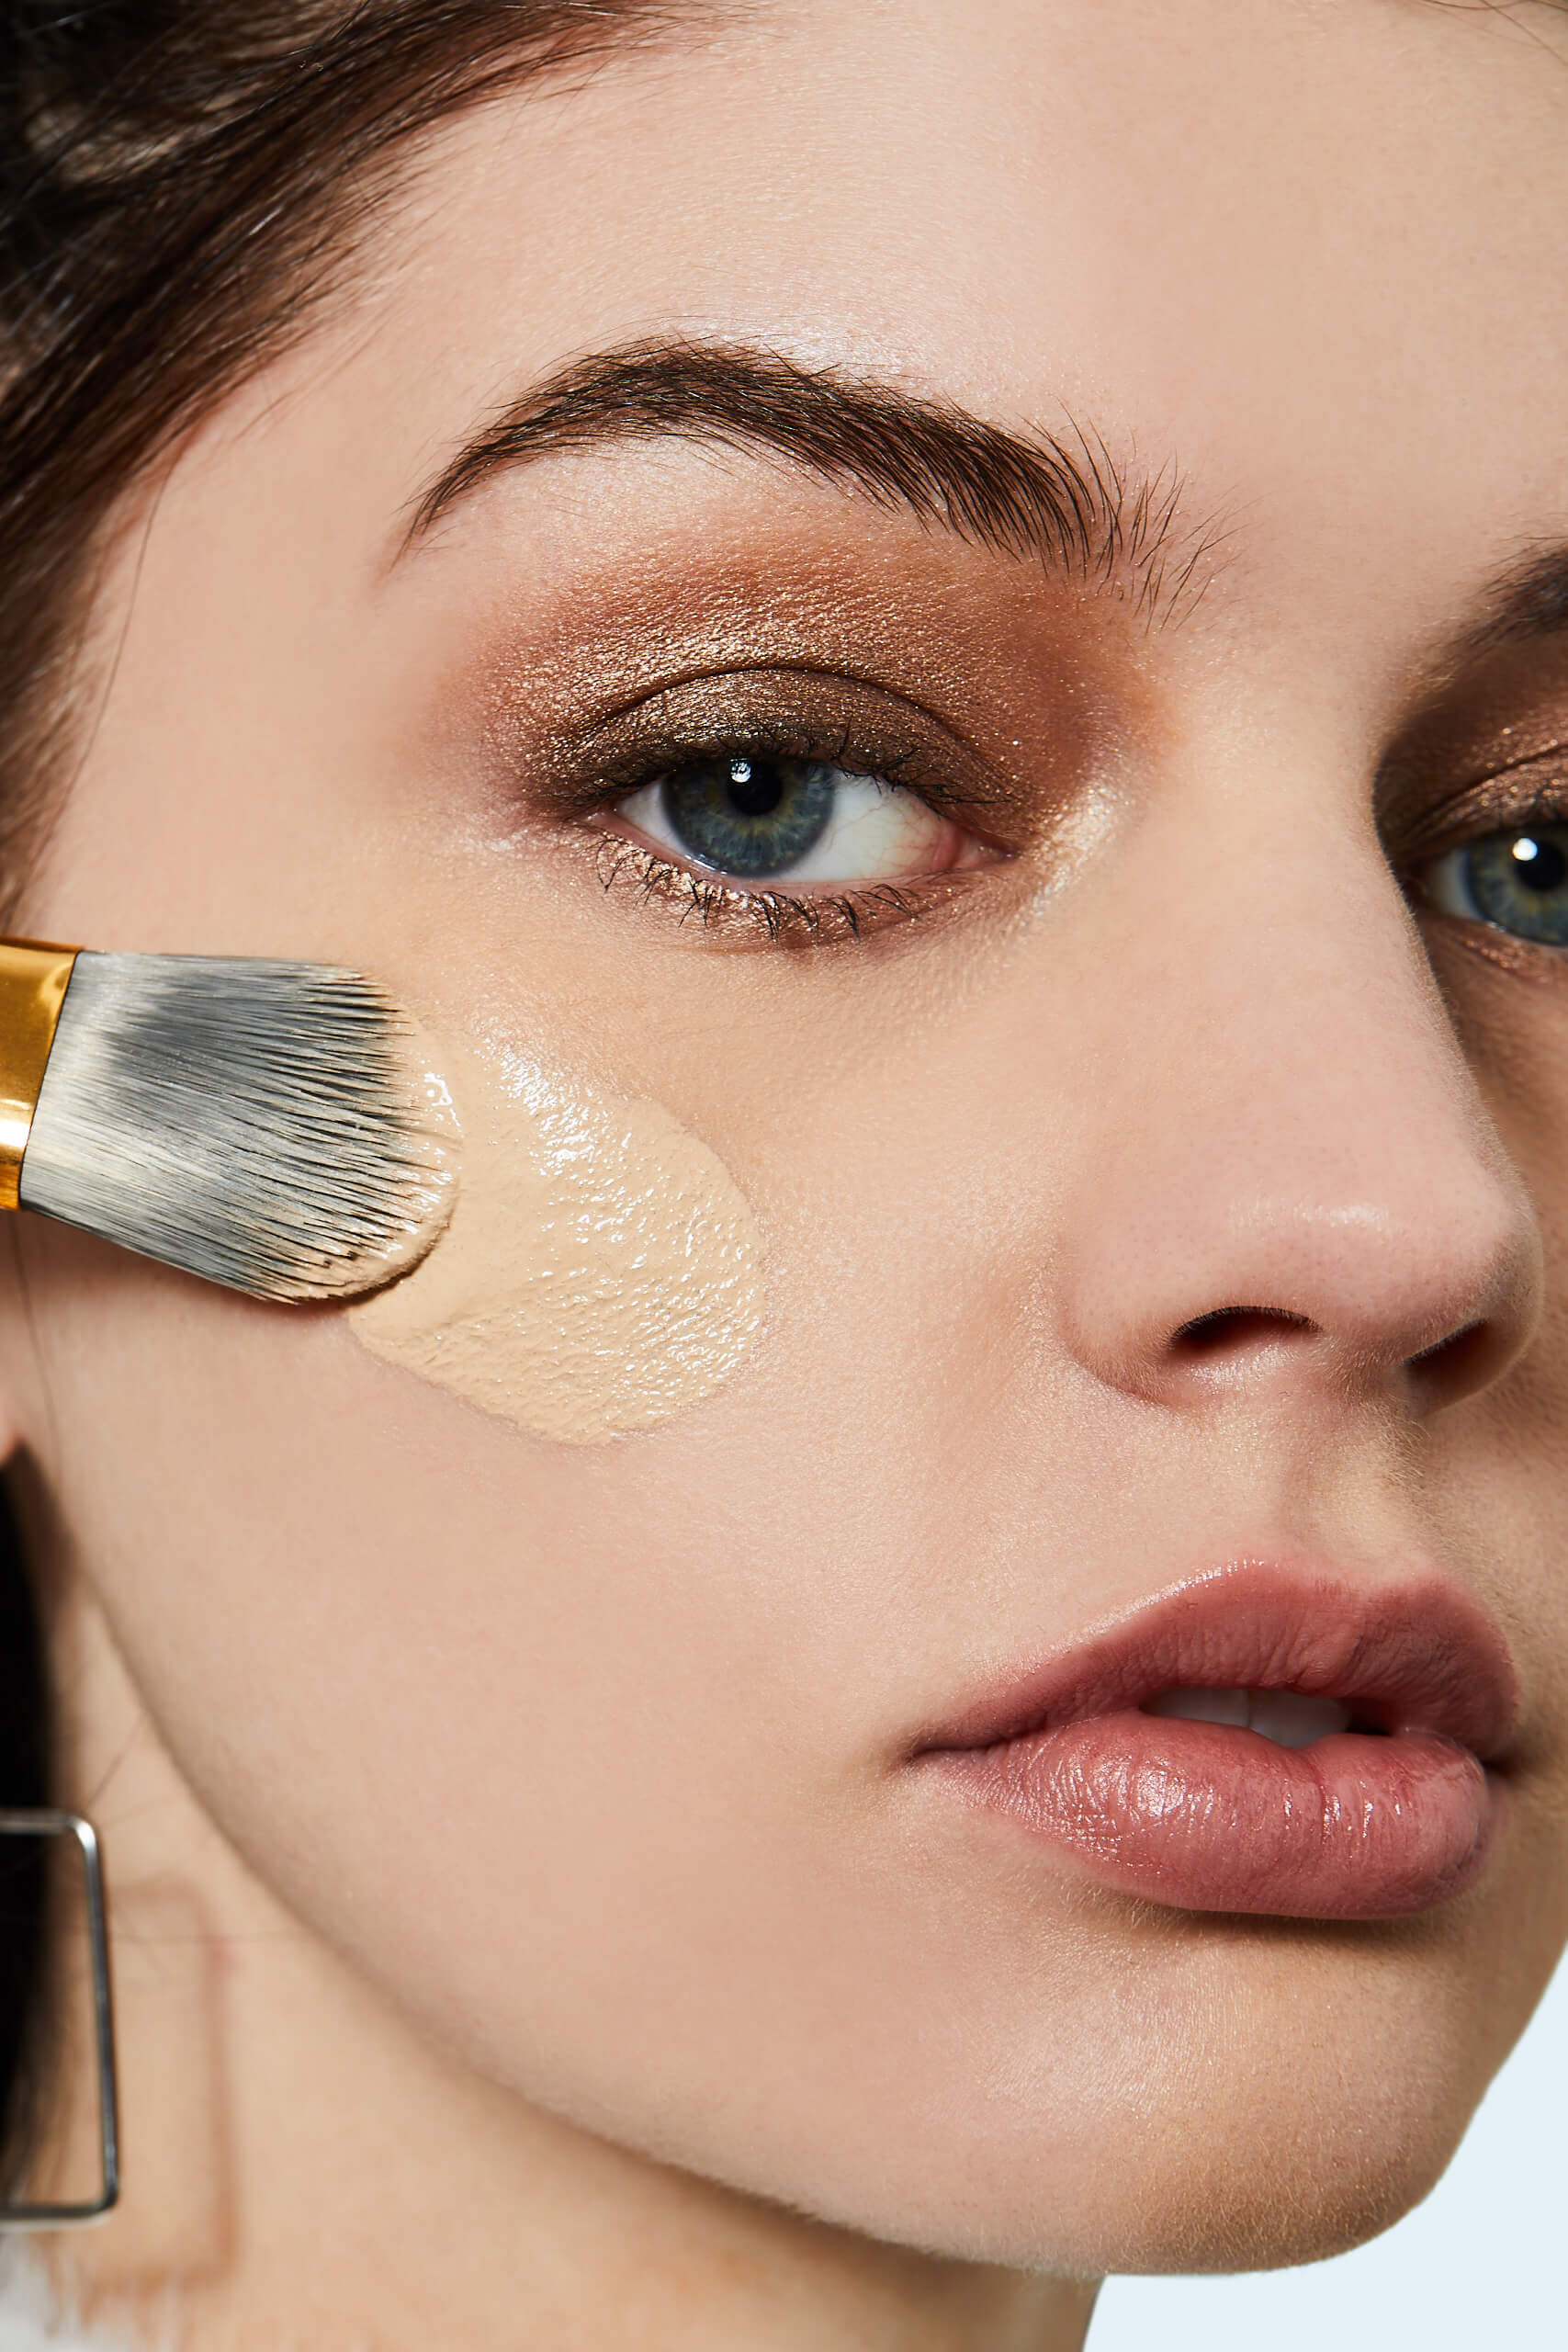 How to Apply Makeup in 13 Easy, Pro